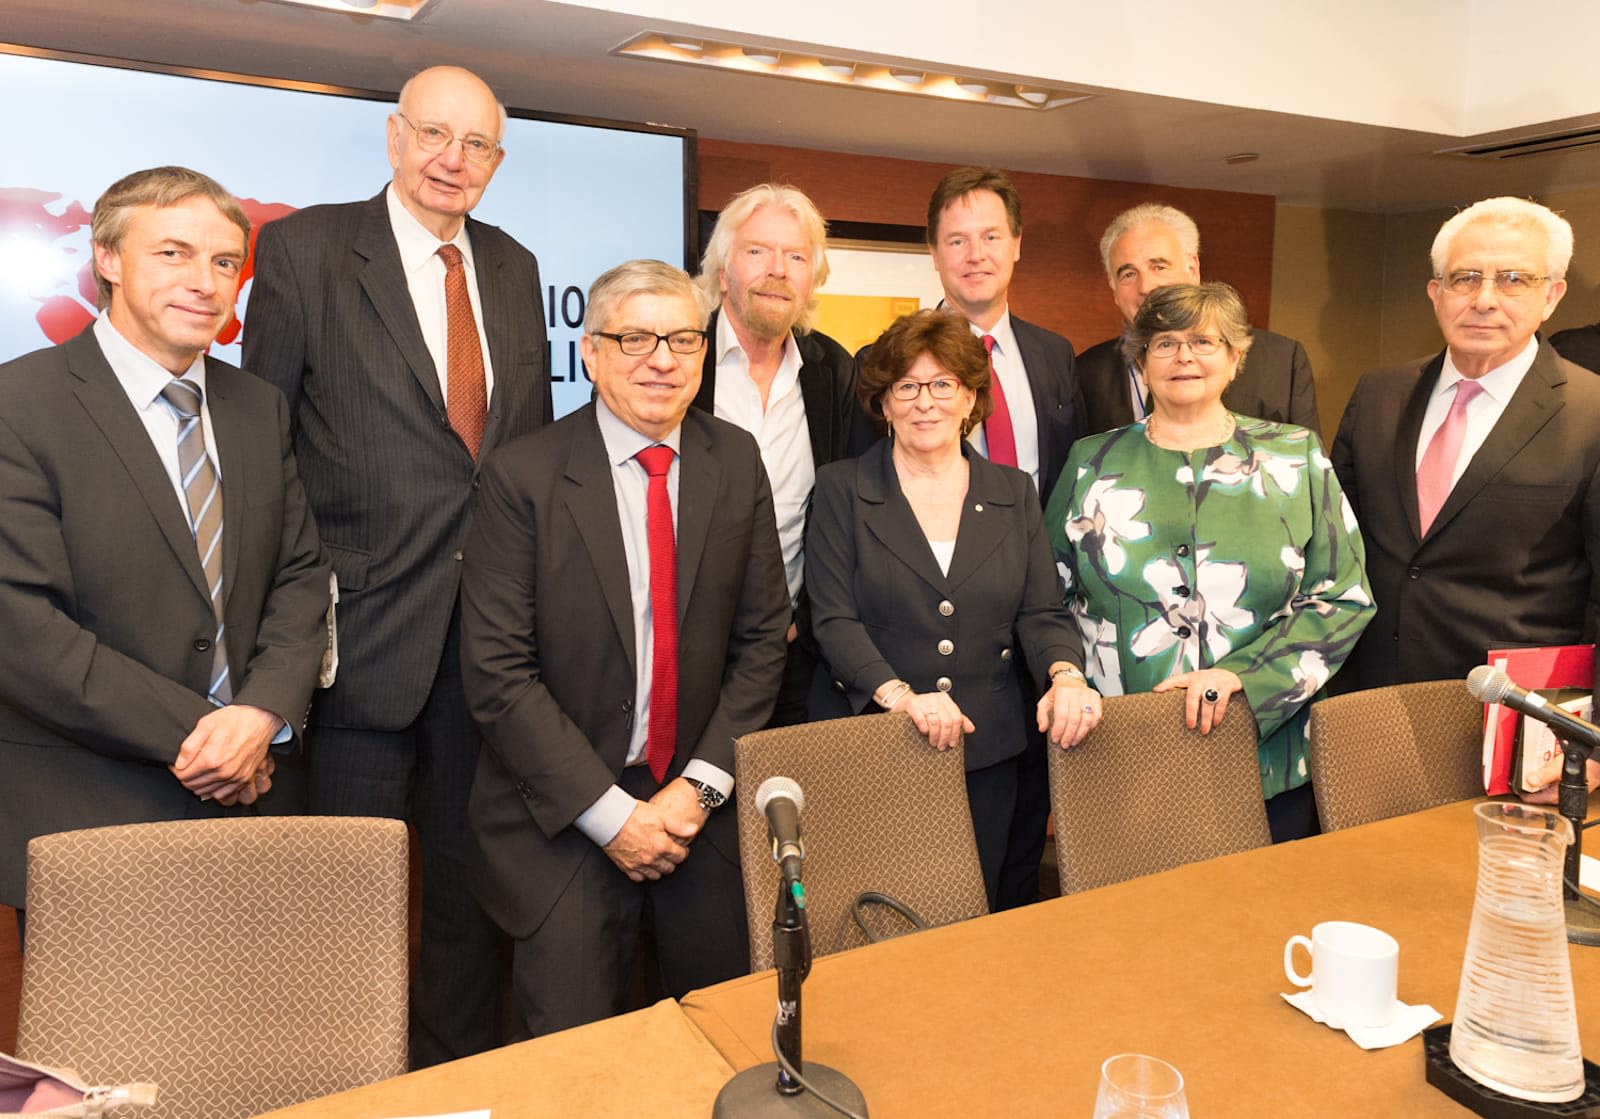 Richard Branson and fellow drug policy commission board photo.